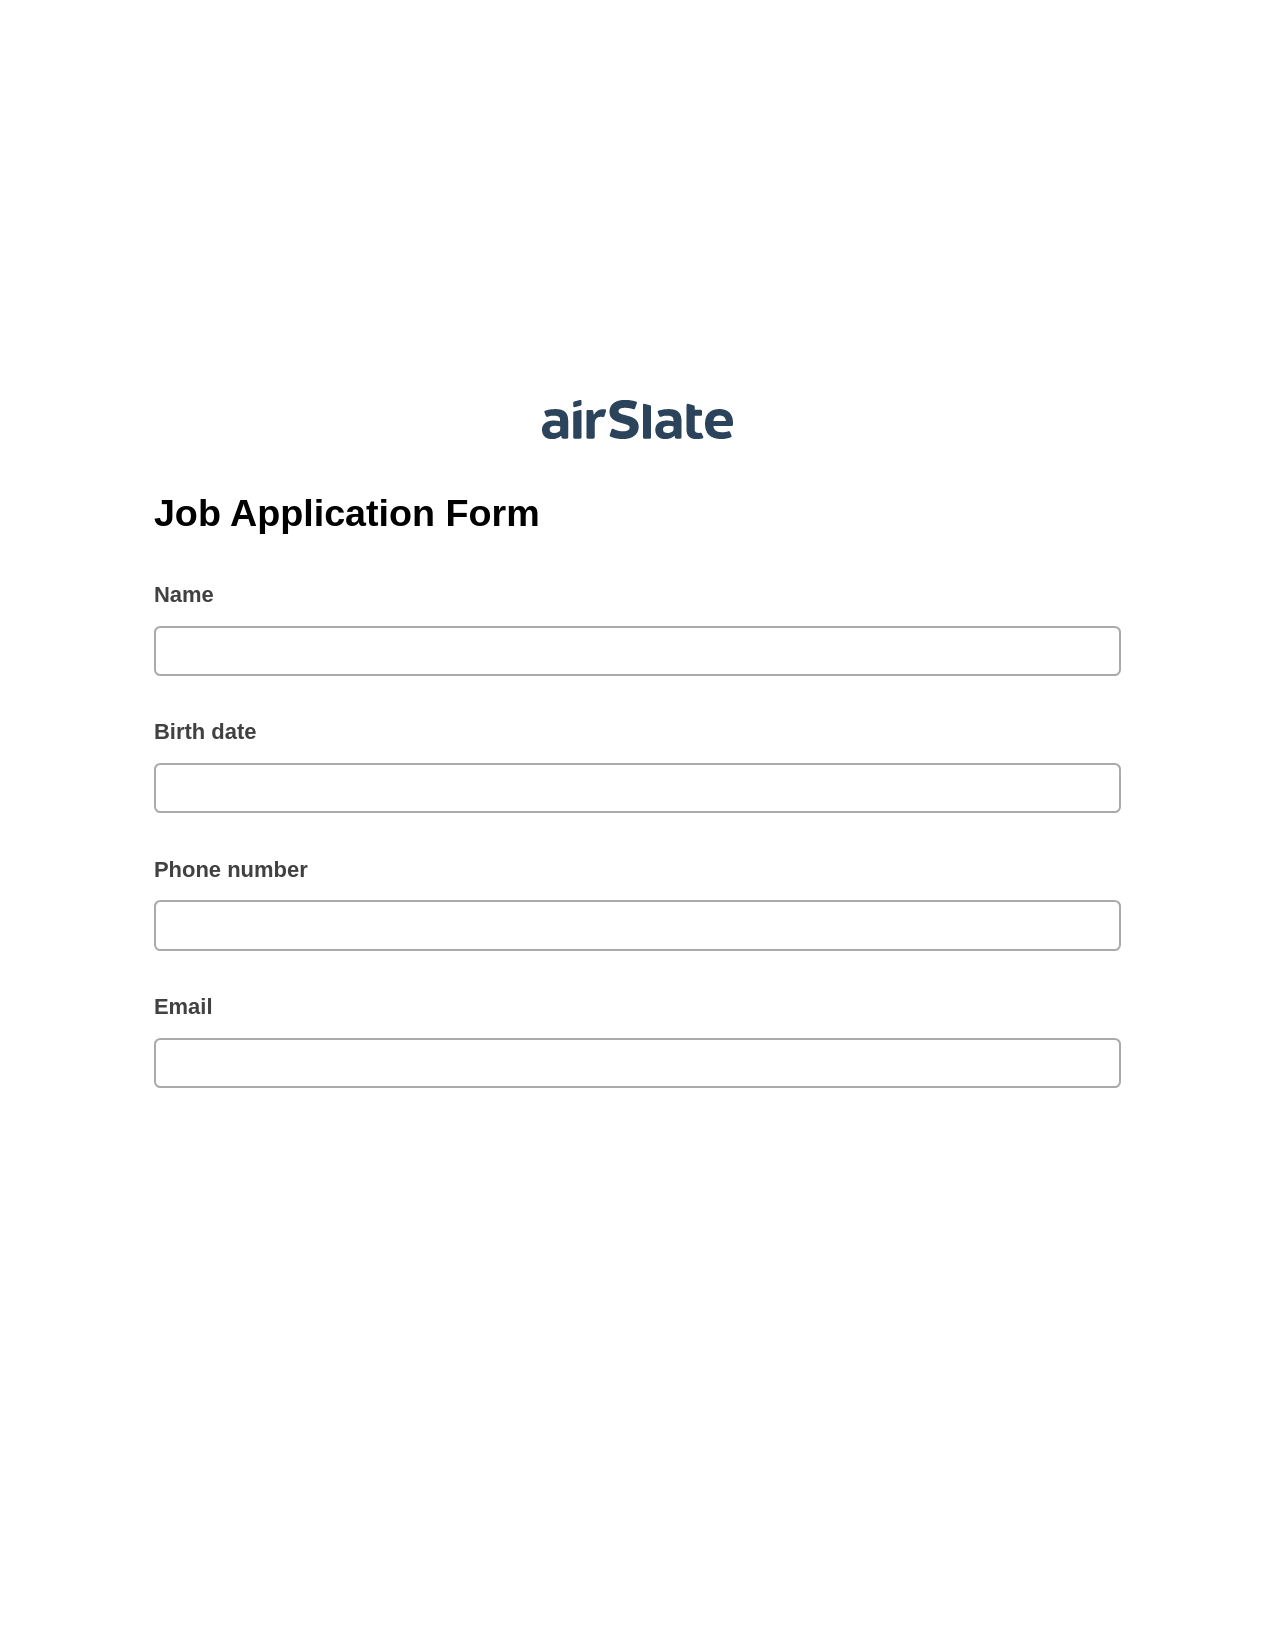 Job Application Form Pre-fill from Salesforce Record Bot, Export to MS Dynamics 365 Bot, OneDrive Bot